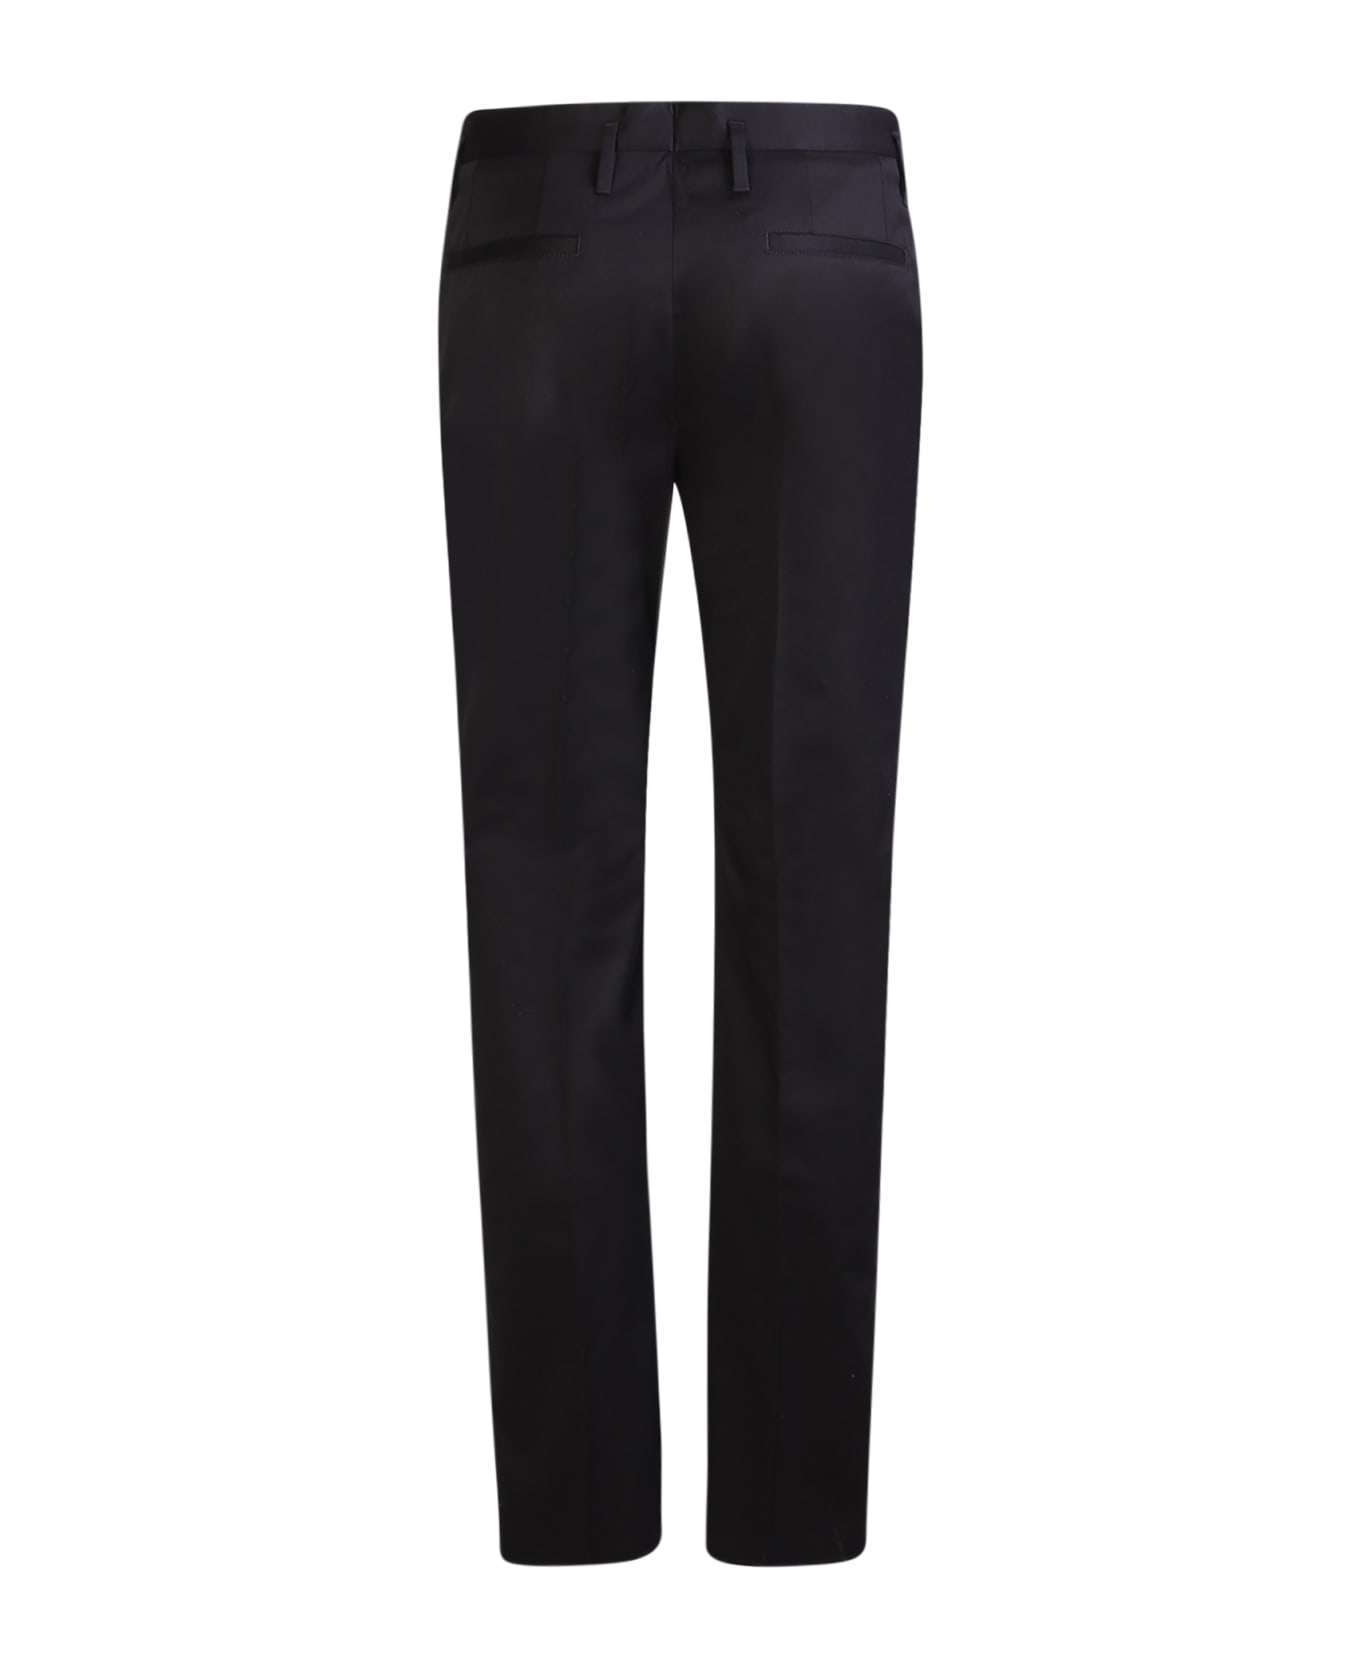 Dolce & Gabbana Tailored Trousers - Black